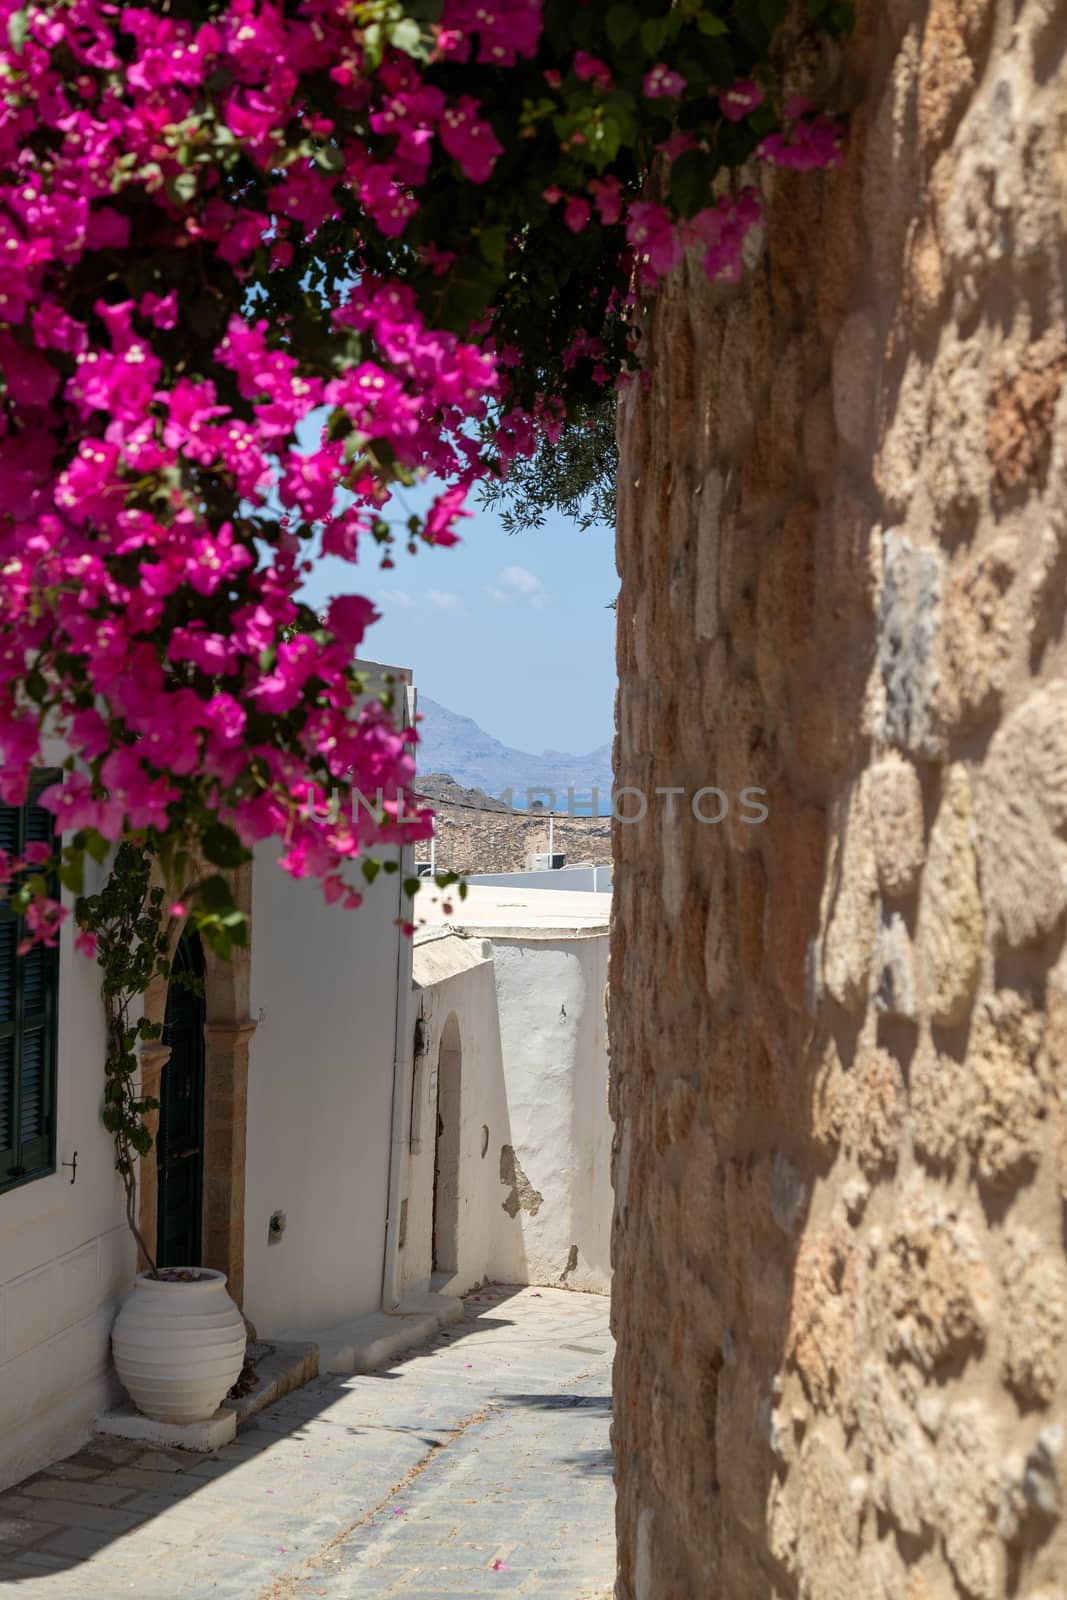 Narrow lane with purple flowers and white houses in Lindos on Gr by reinerc